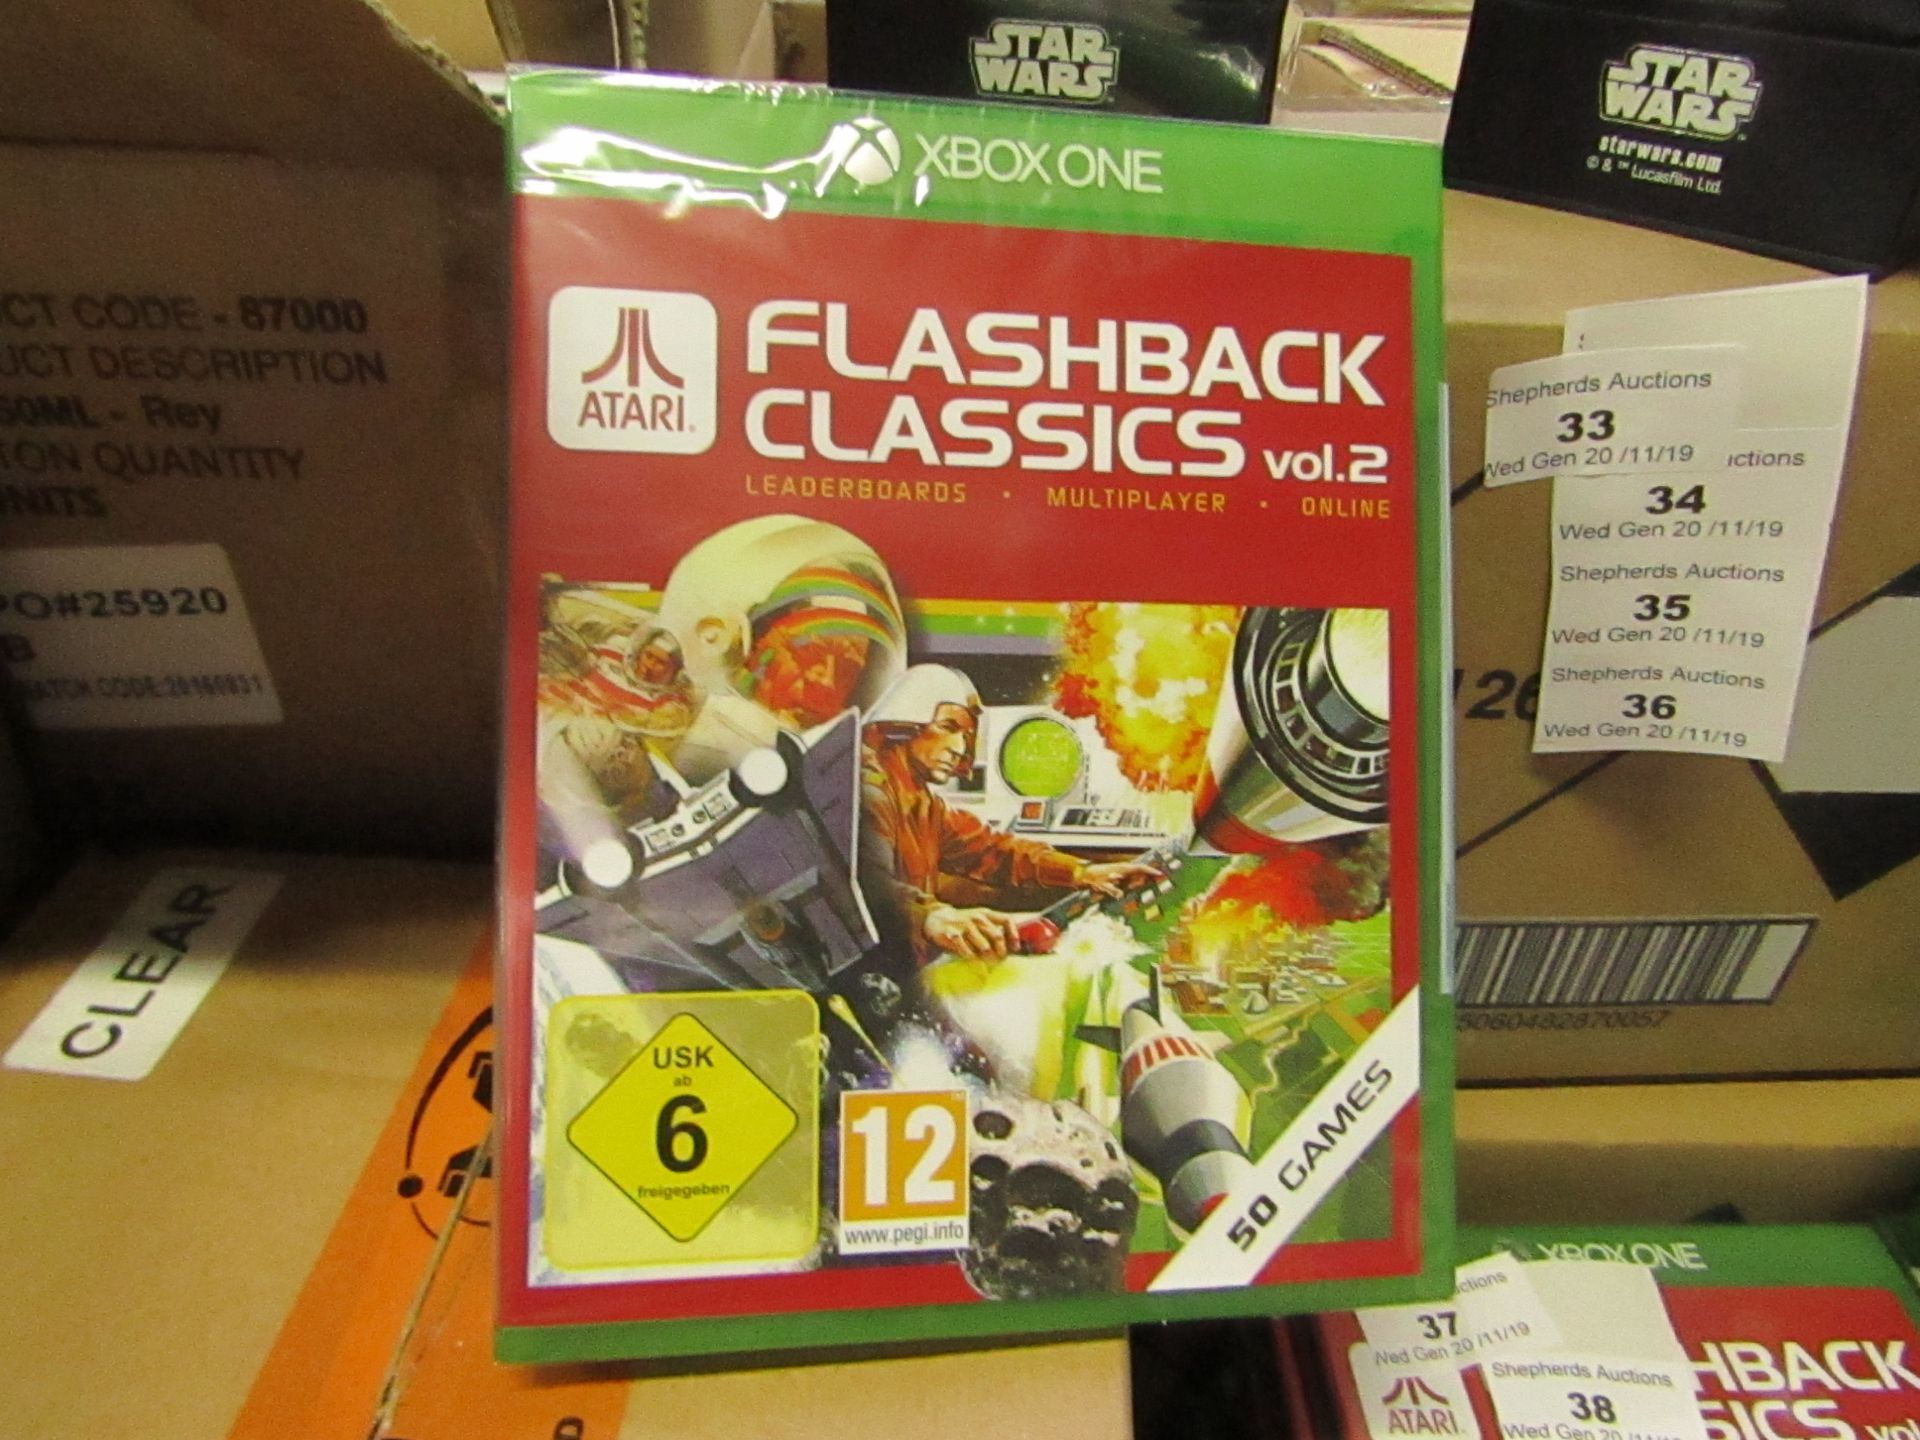 Atari Flash Back Classics Volume 2 for Xbox One, new and still sealed